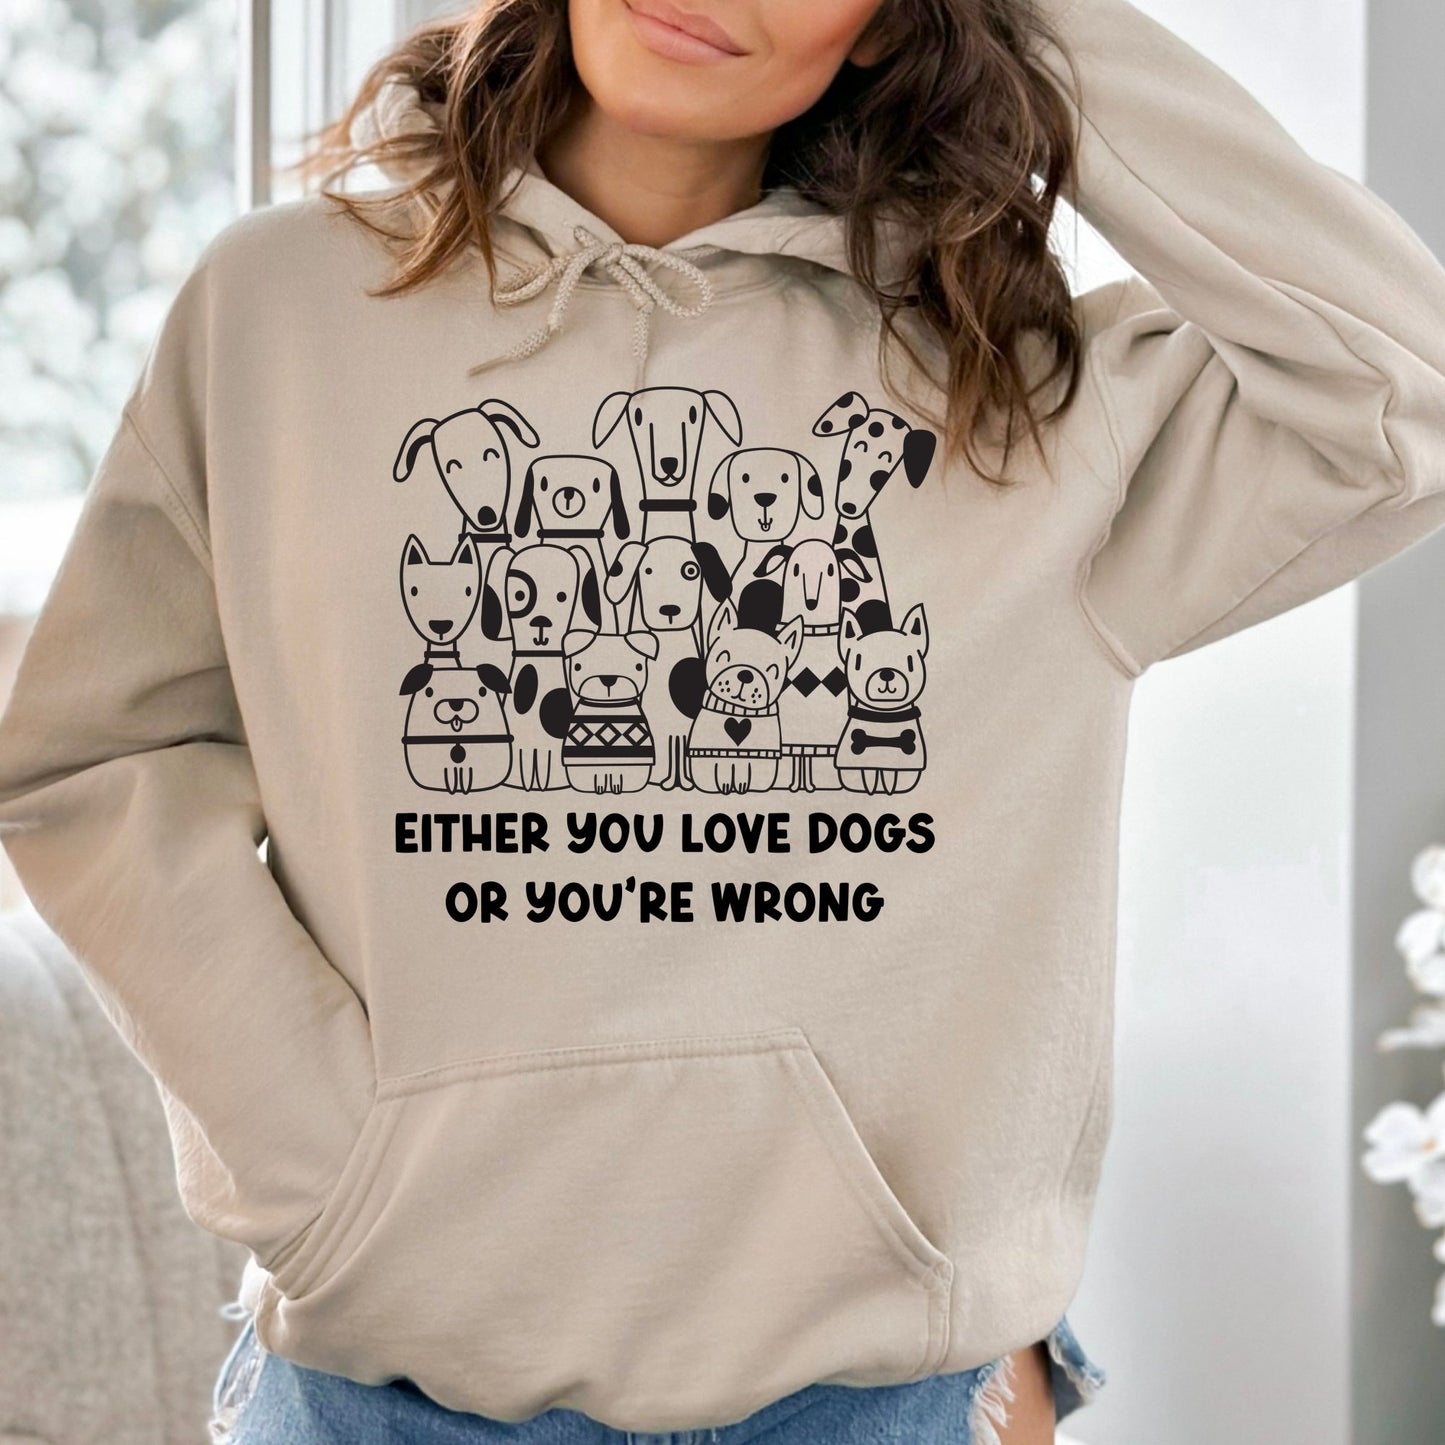 Either You Love Dogs or You're Wrong Hooded Sweatshirt - PuppyJo Sweatshirt S / Sand